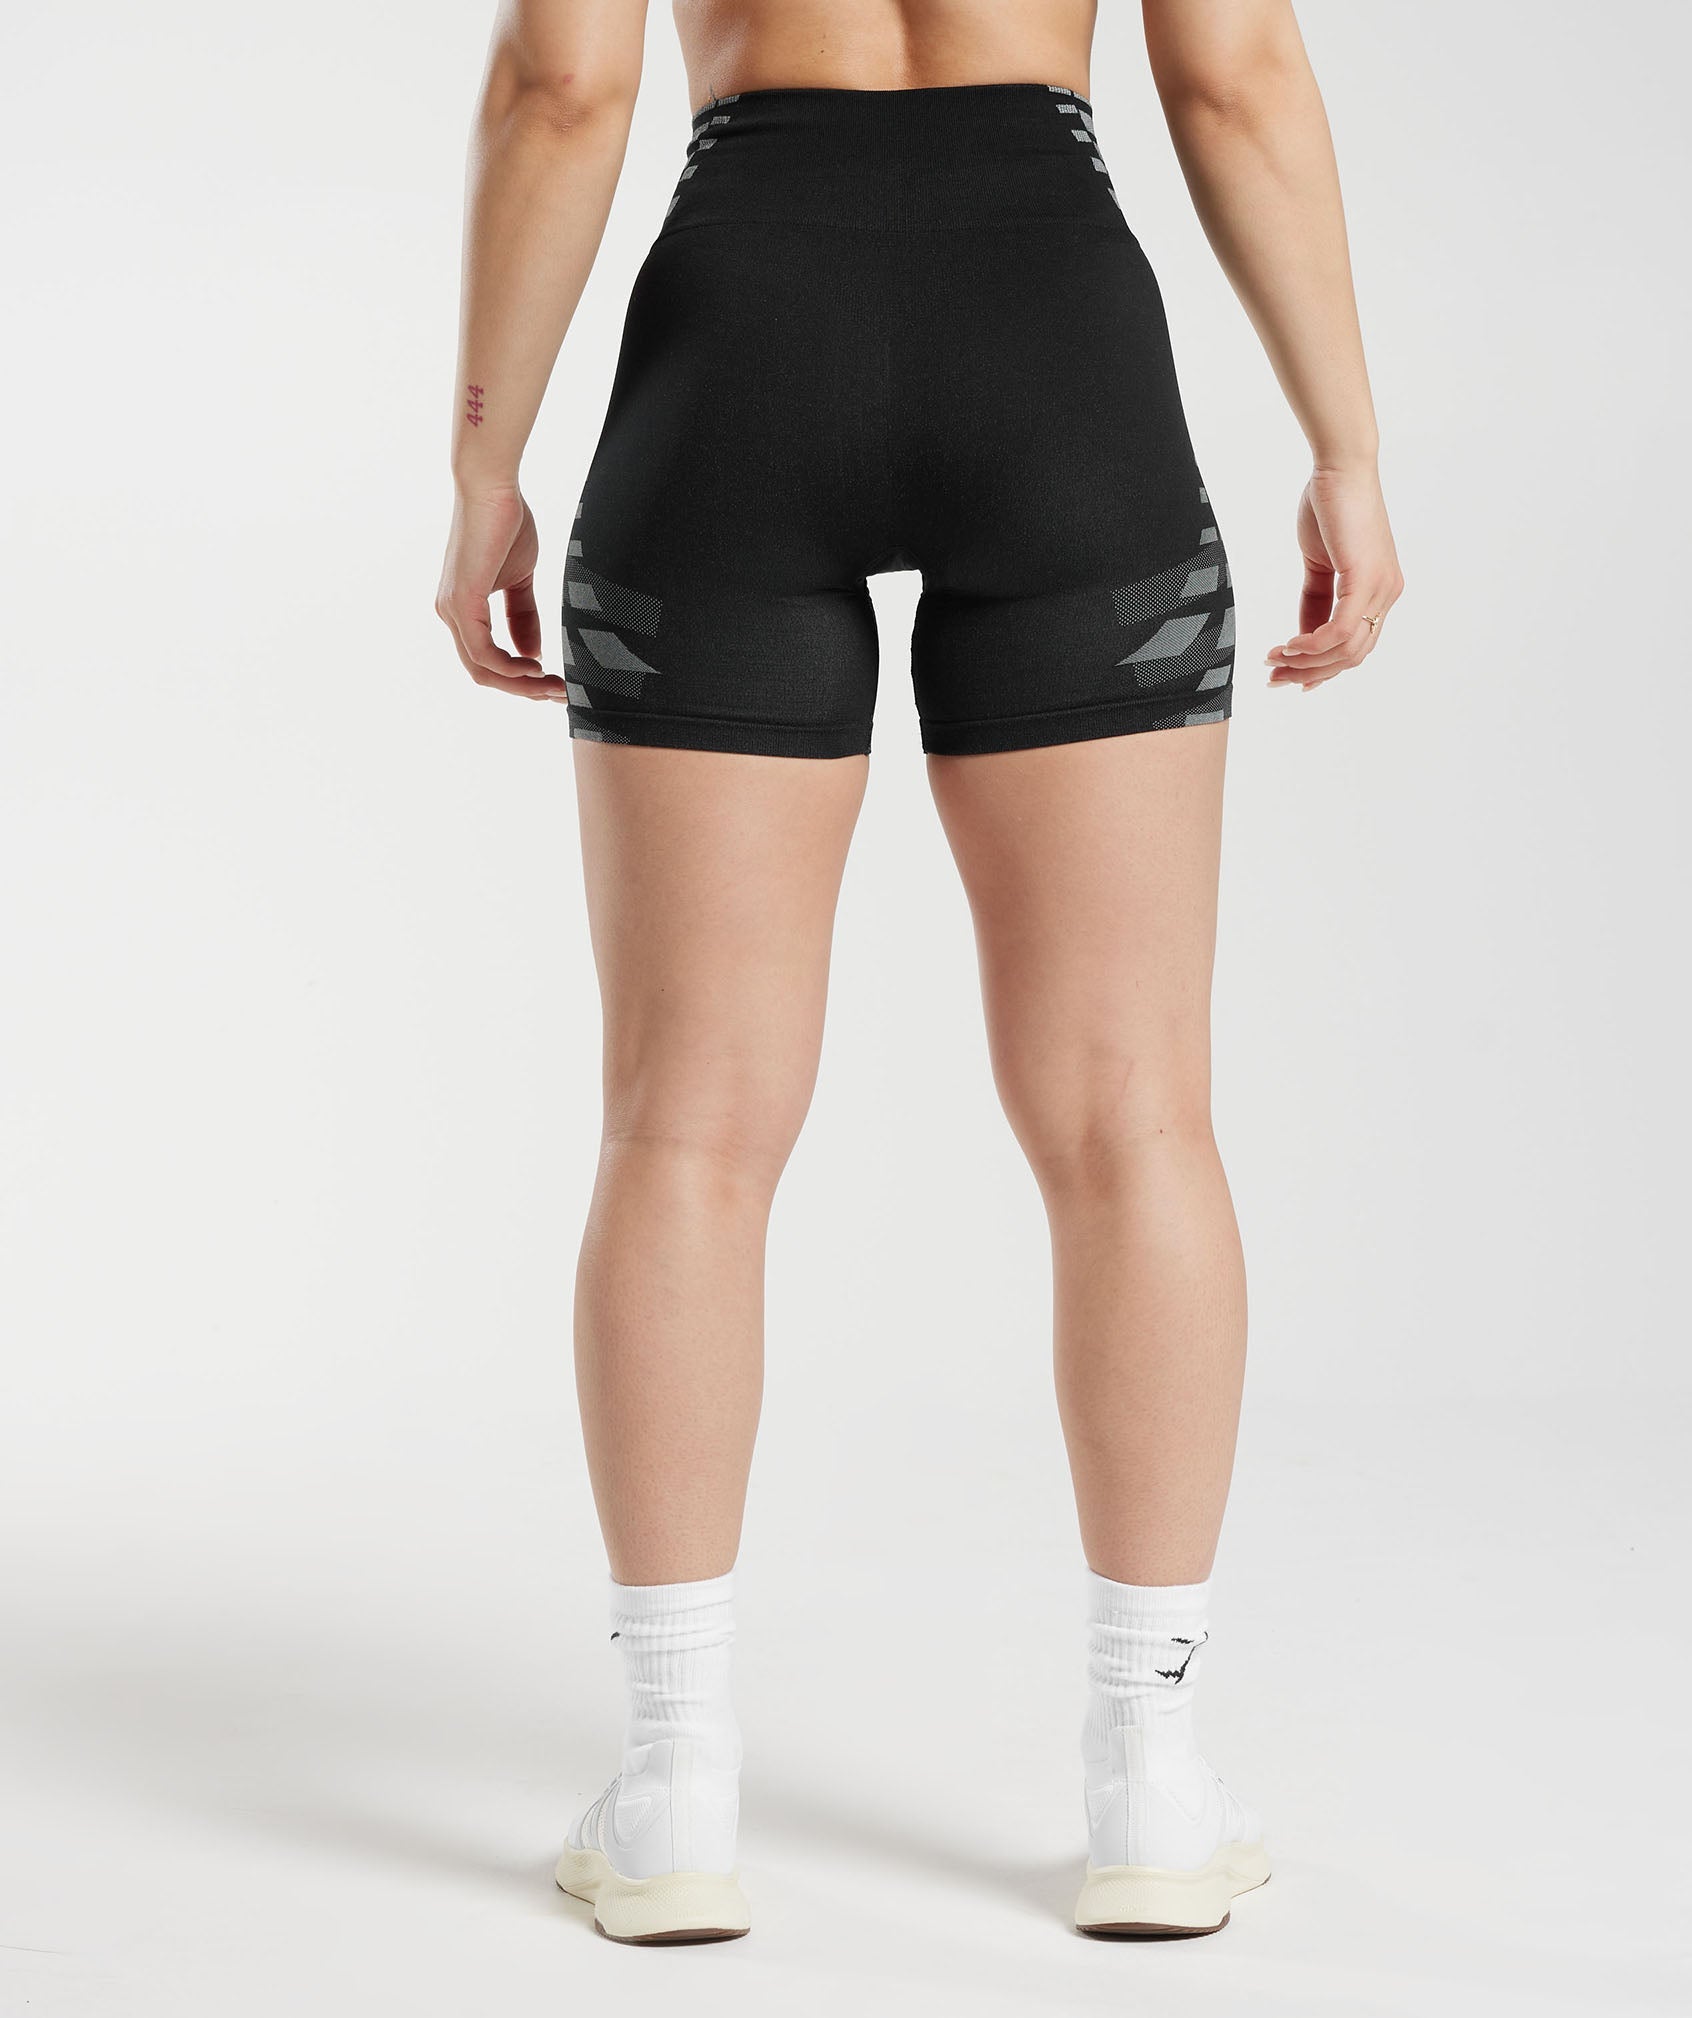 Apex Limit Shorts in Black/Light Grey - view 2